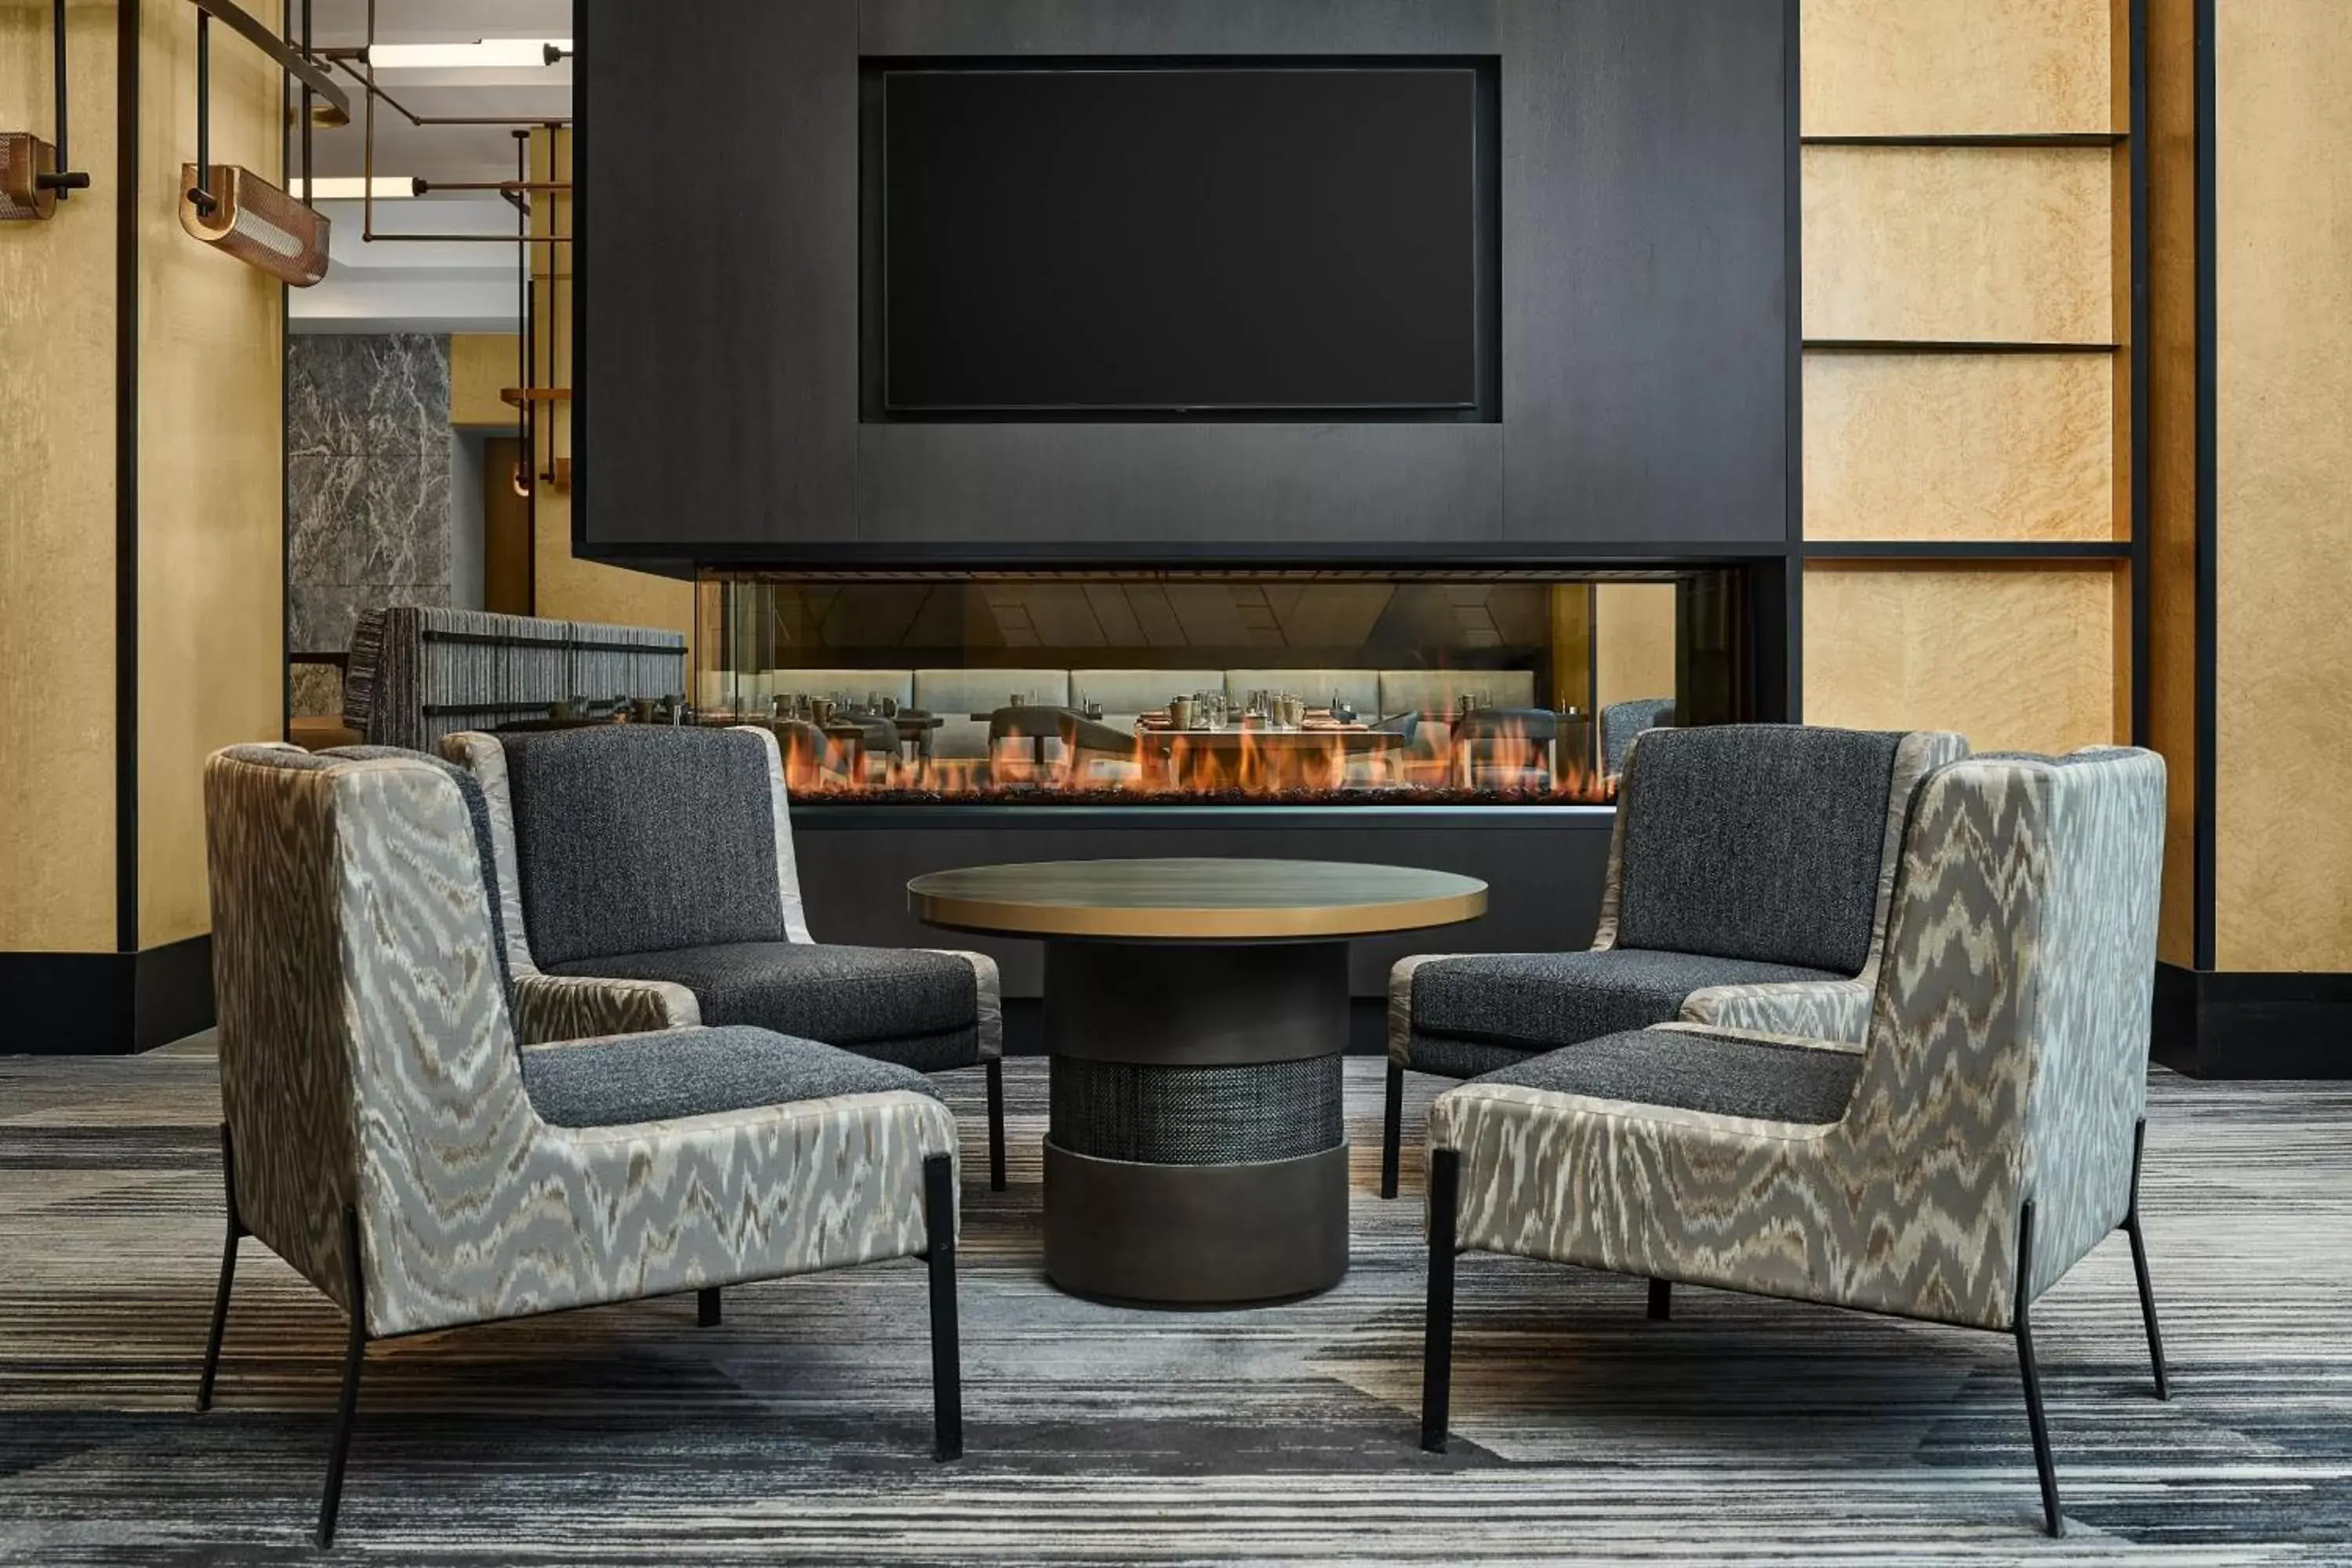 Property building, TV/Entertainment Center in The Westin Denver Downtown